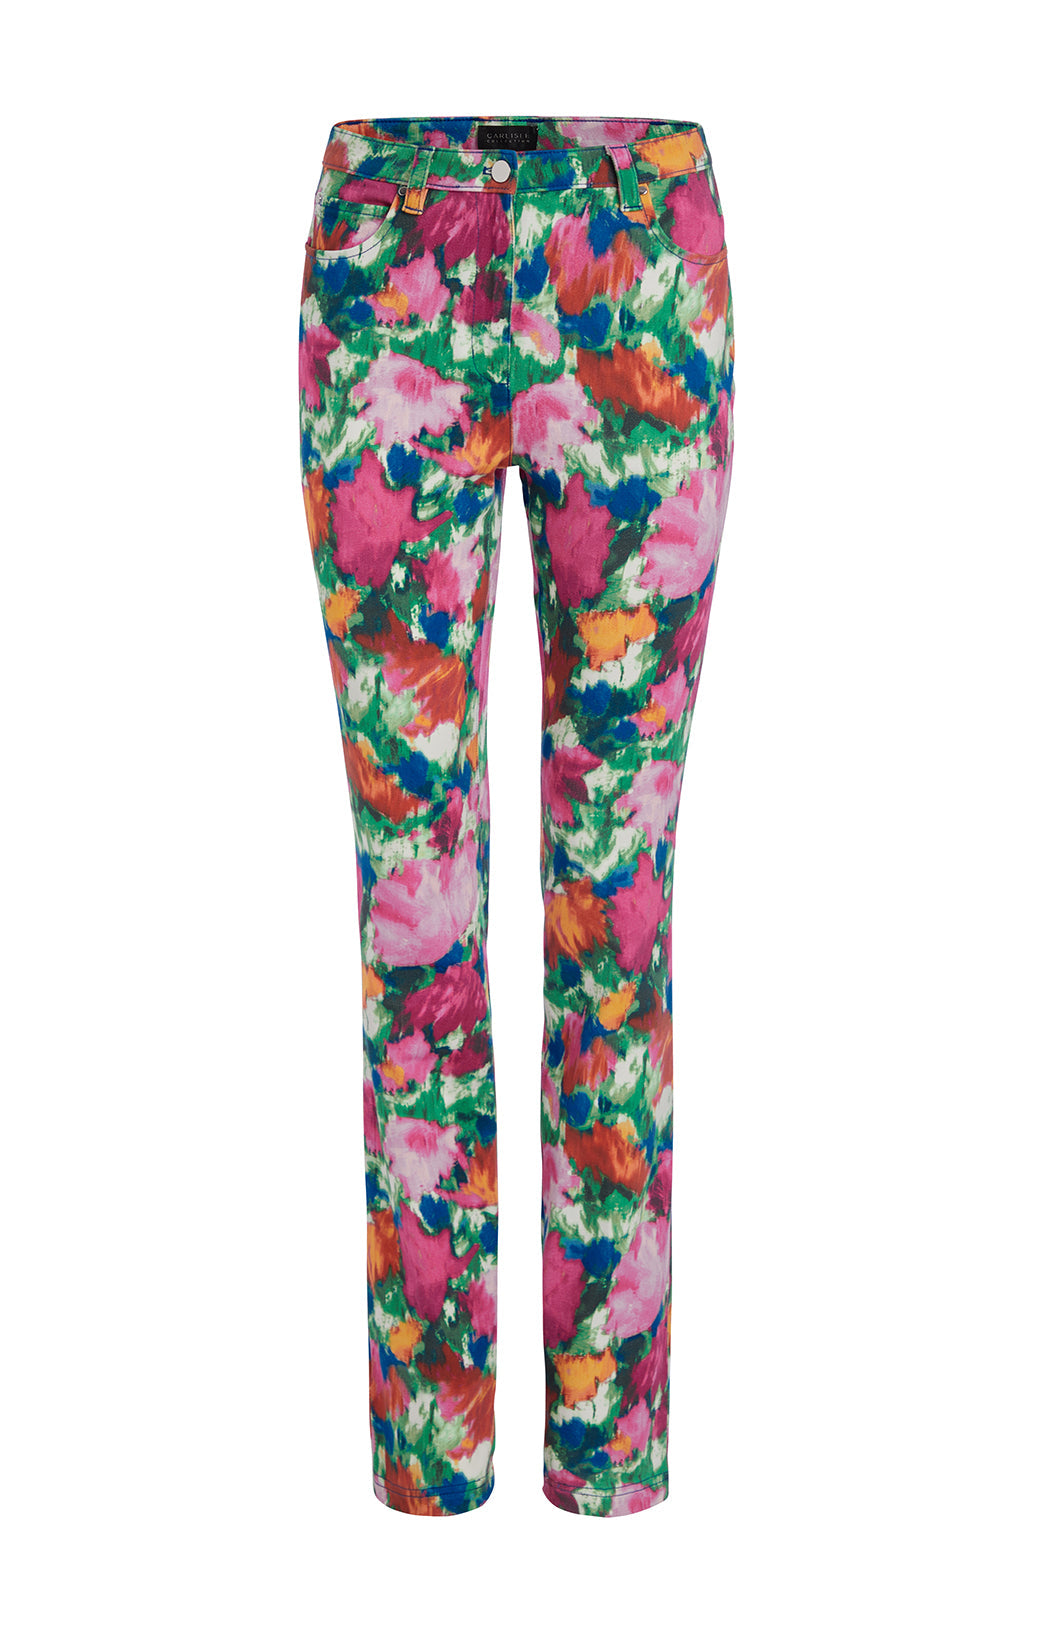 Inspiration - Tropical Print Jeans - Product Image